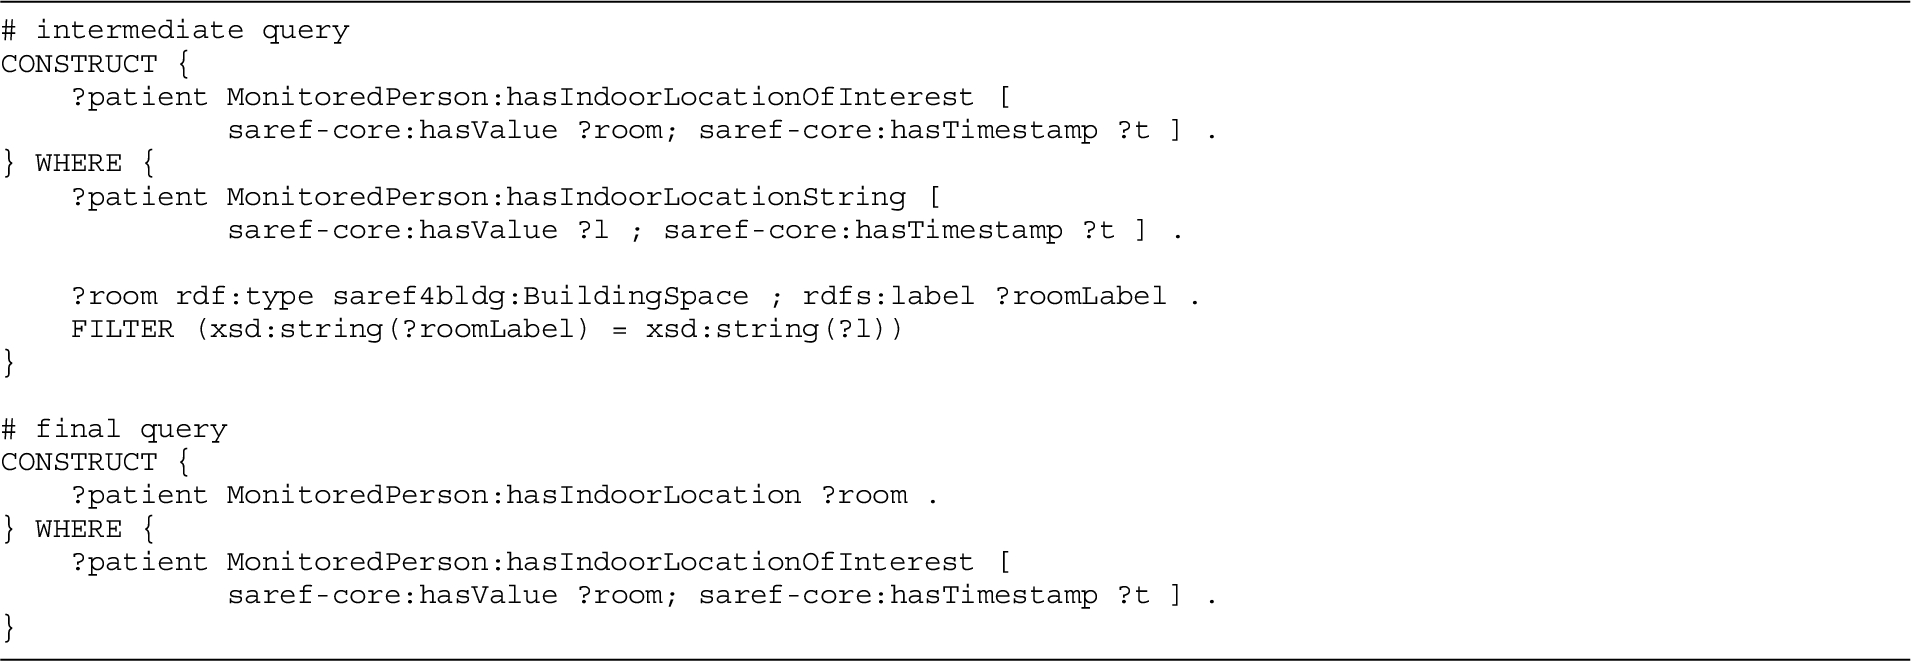 Example of intermediate query and final query in the end user definition of the DIVIDE query that performs the monitoring of the patient’s location in the home. The solution modifier of the final query would be ORDER BY DESC(?t) LIMIT 1 to retrieve the most recent location only.